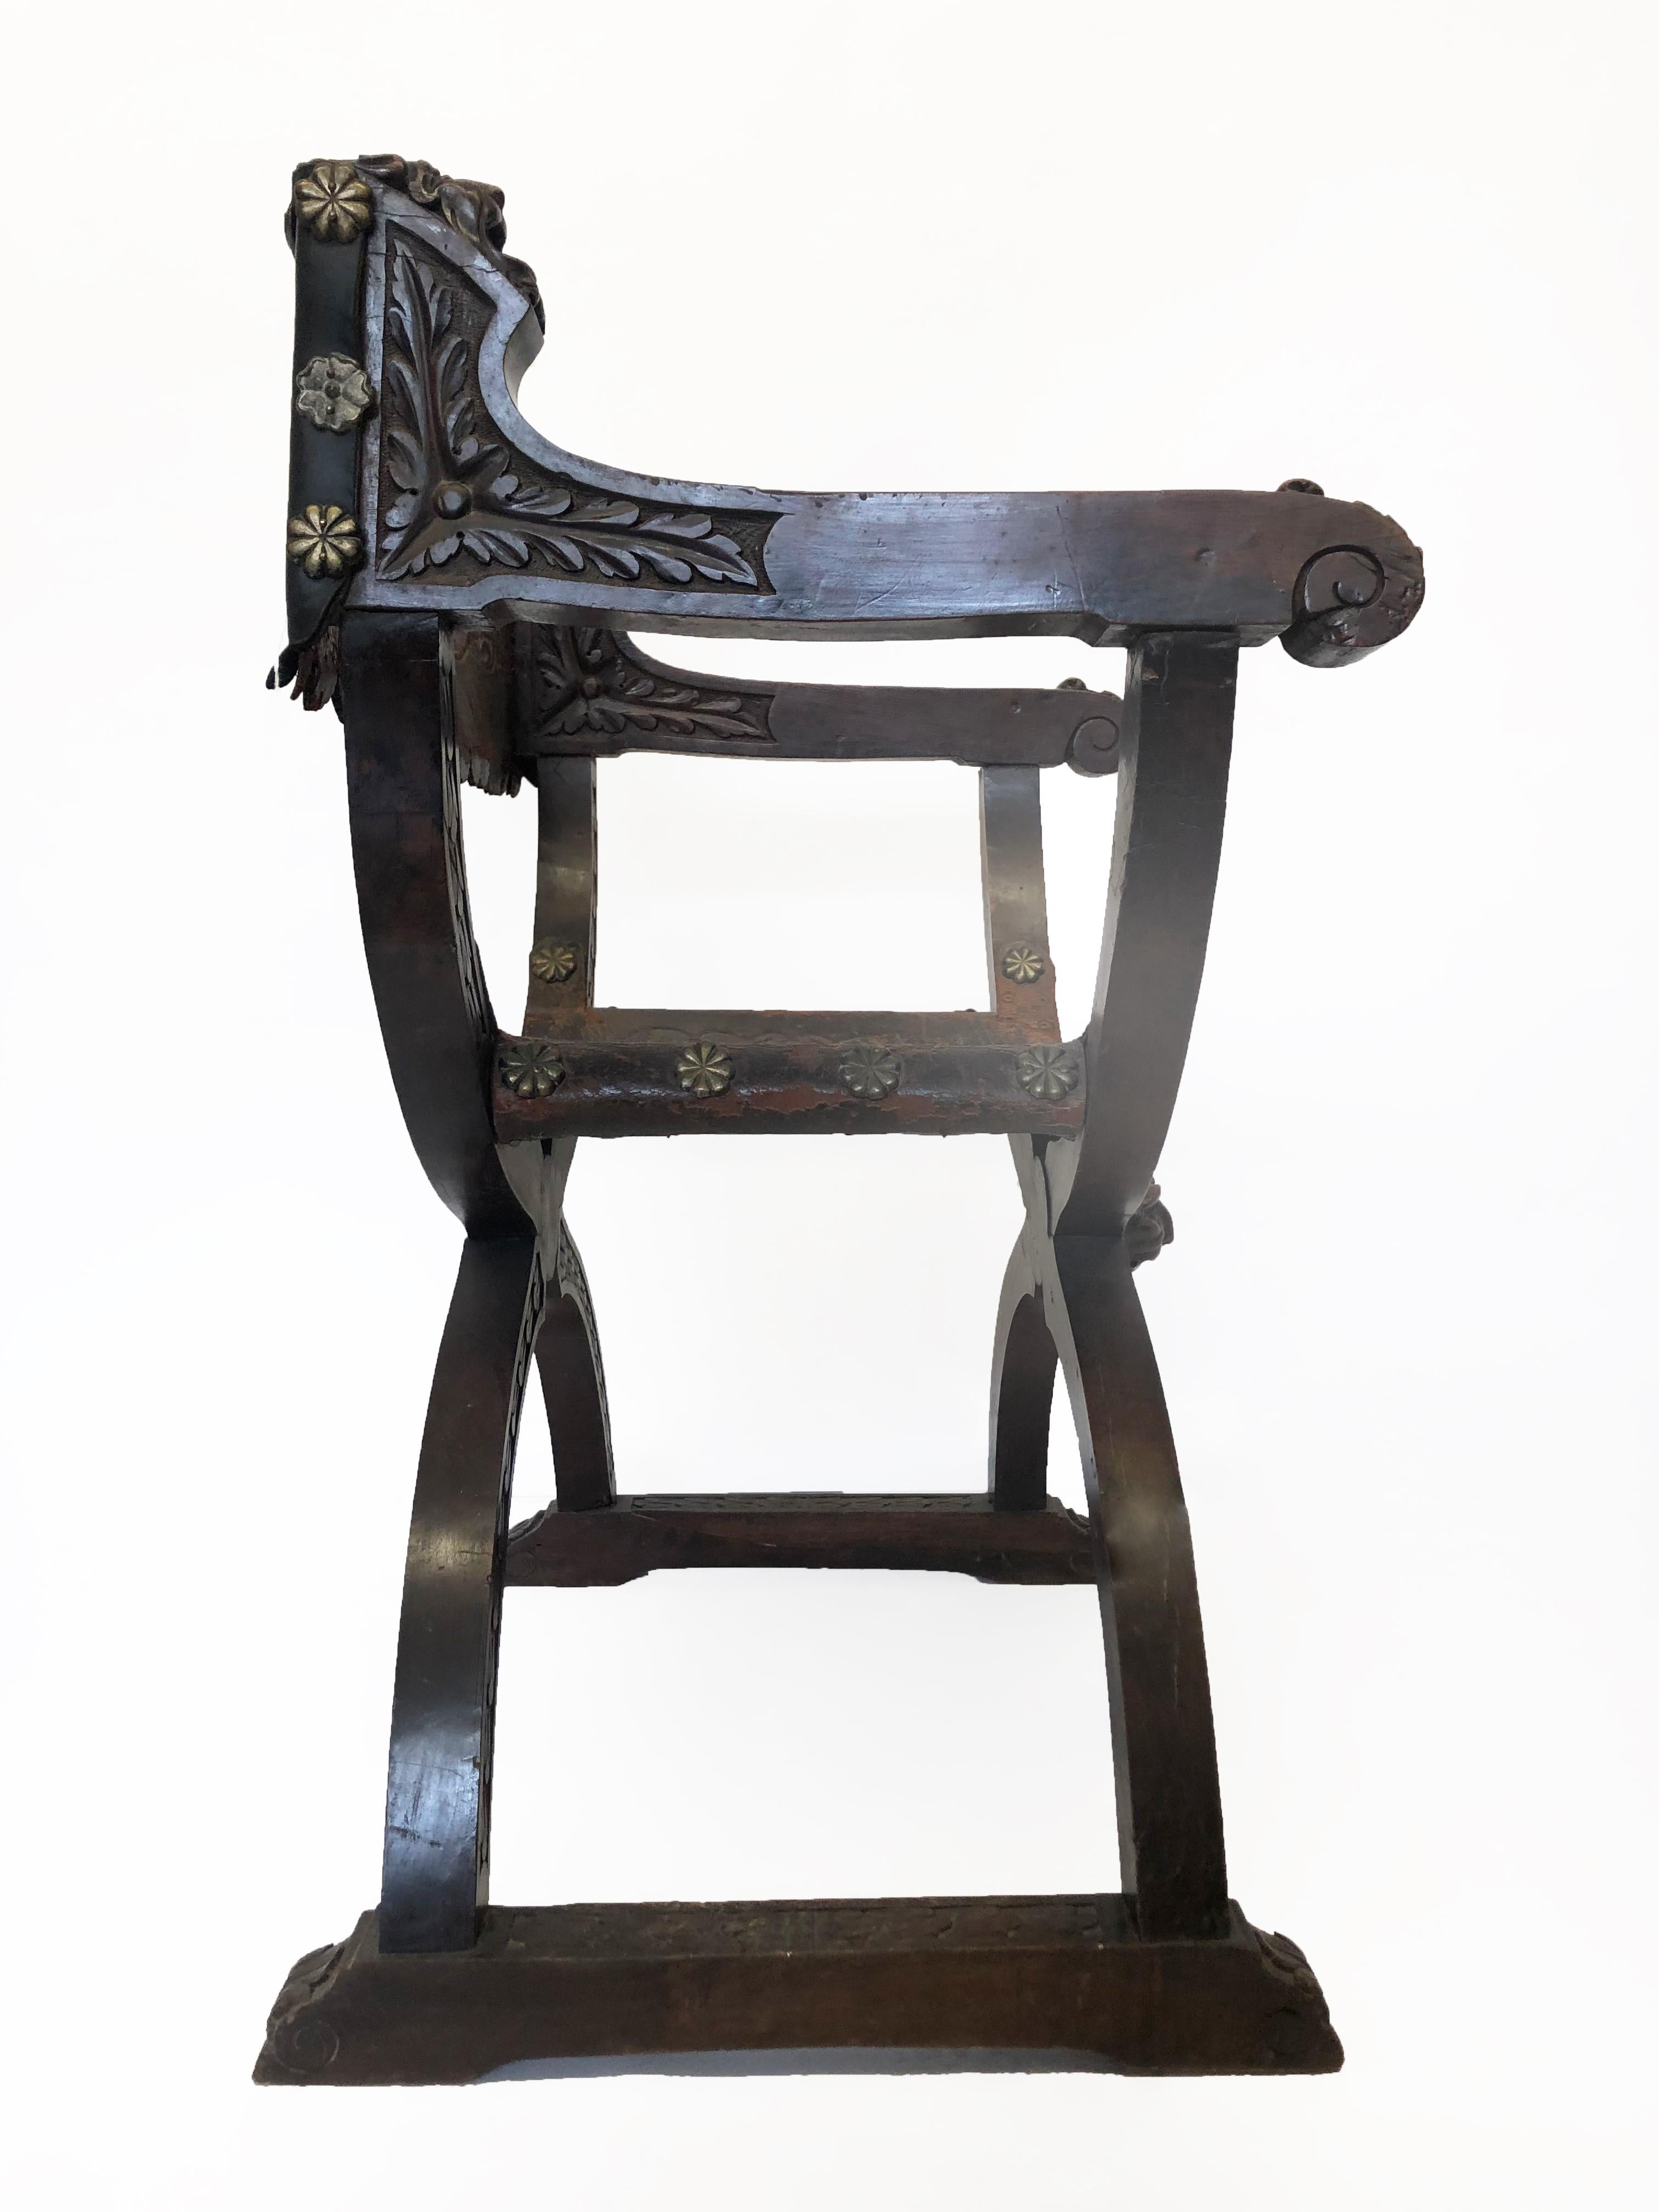 This is a Dante or Savonarola wood and leather settle chair. The wood work is an X- shaped frame with leather back and seating. The entire chair is adorned with carvings throughout its scrolled arms rests, and highly detailed over the back frame and